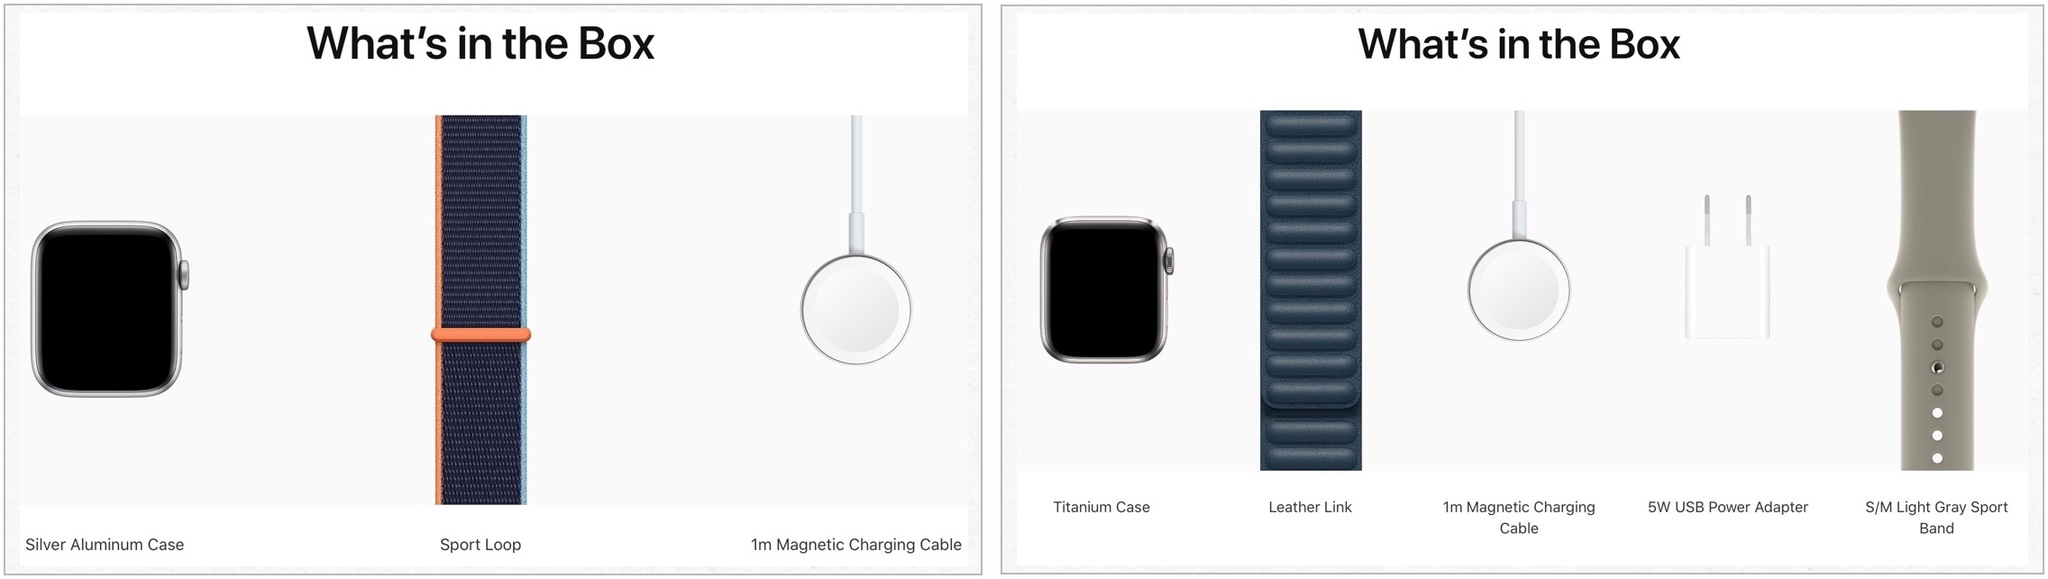 Apple Watch Box Differences